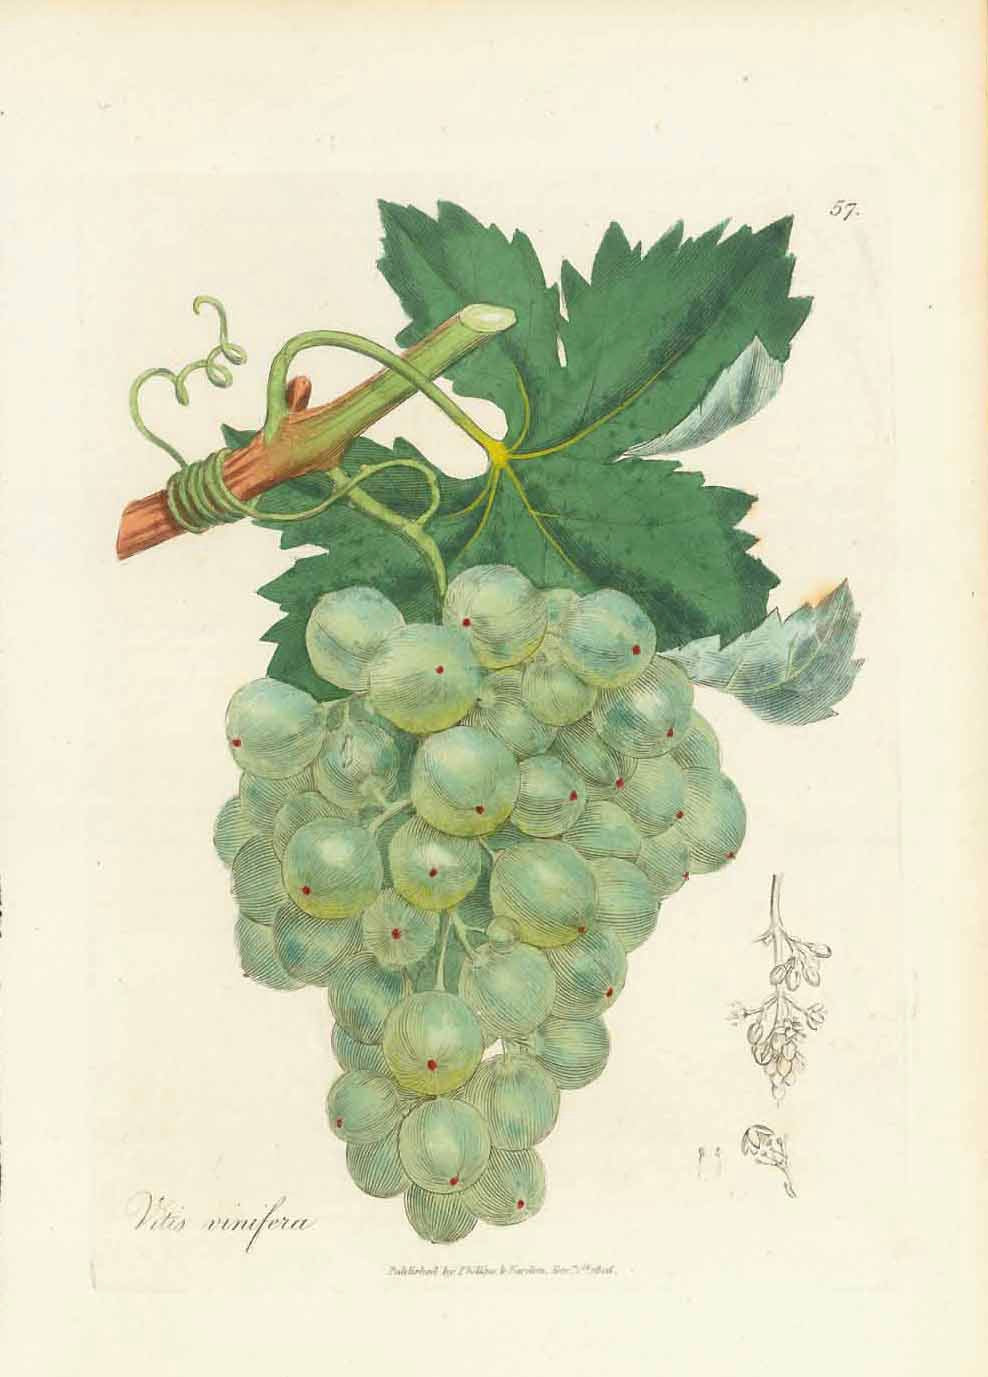 Wine Grapes. - "Vitis vinifera"  Copper etching with original hand coloring  Published in "Medical Botany"  By William Woodville (1752-1805)  Dated on print: 1806  Original antique print 